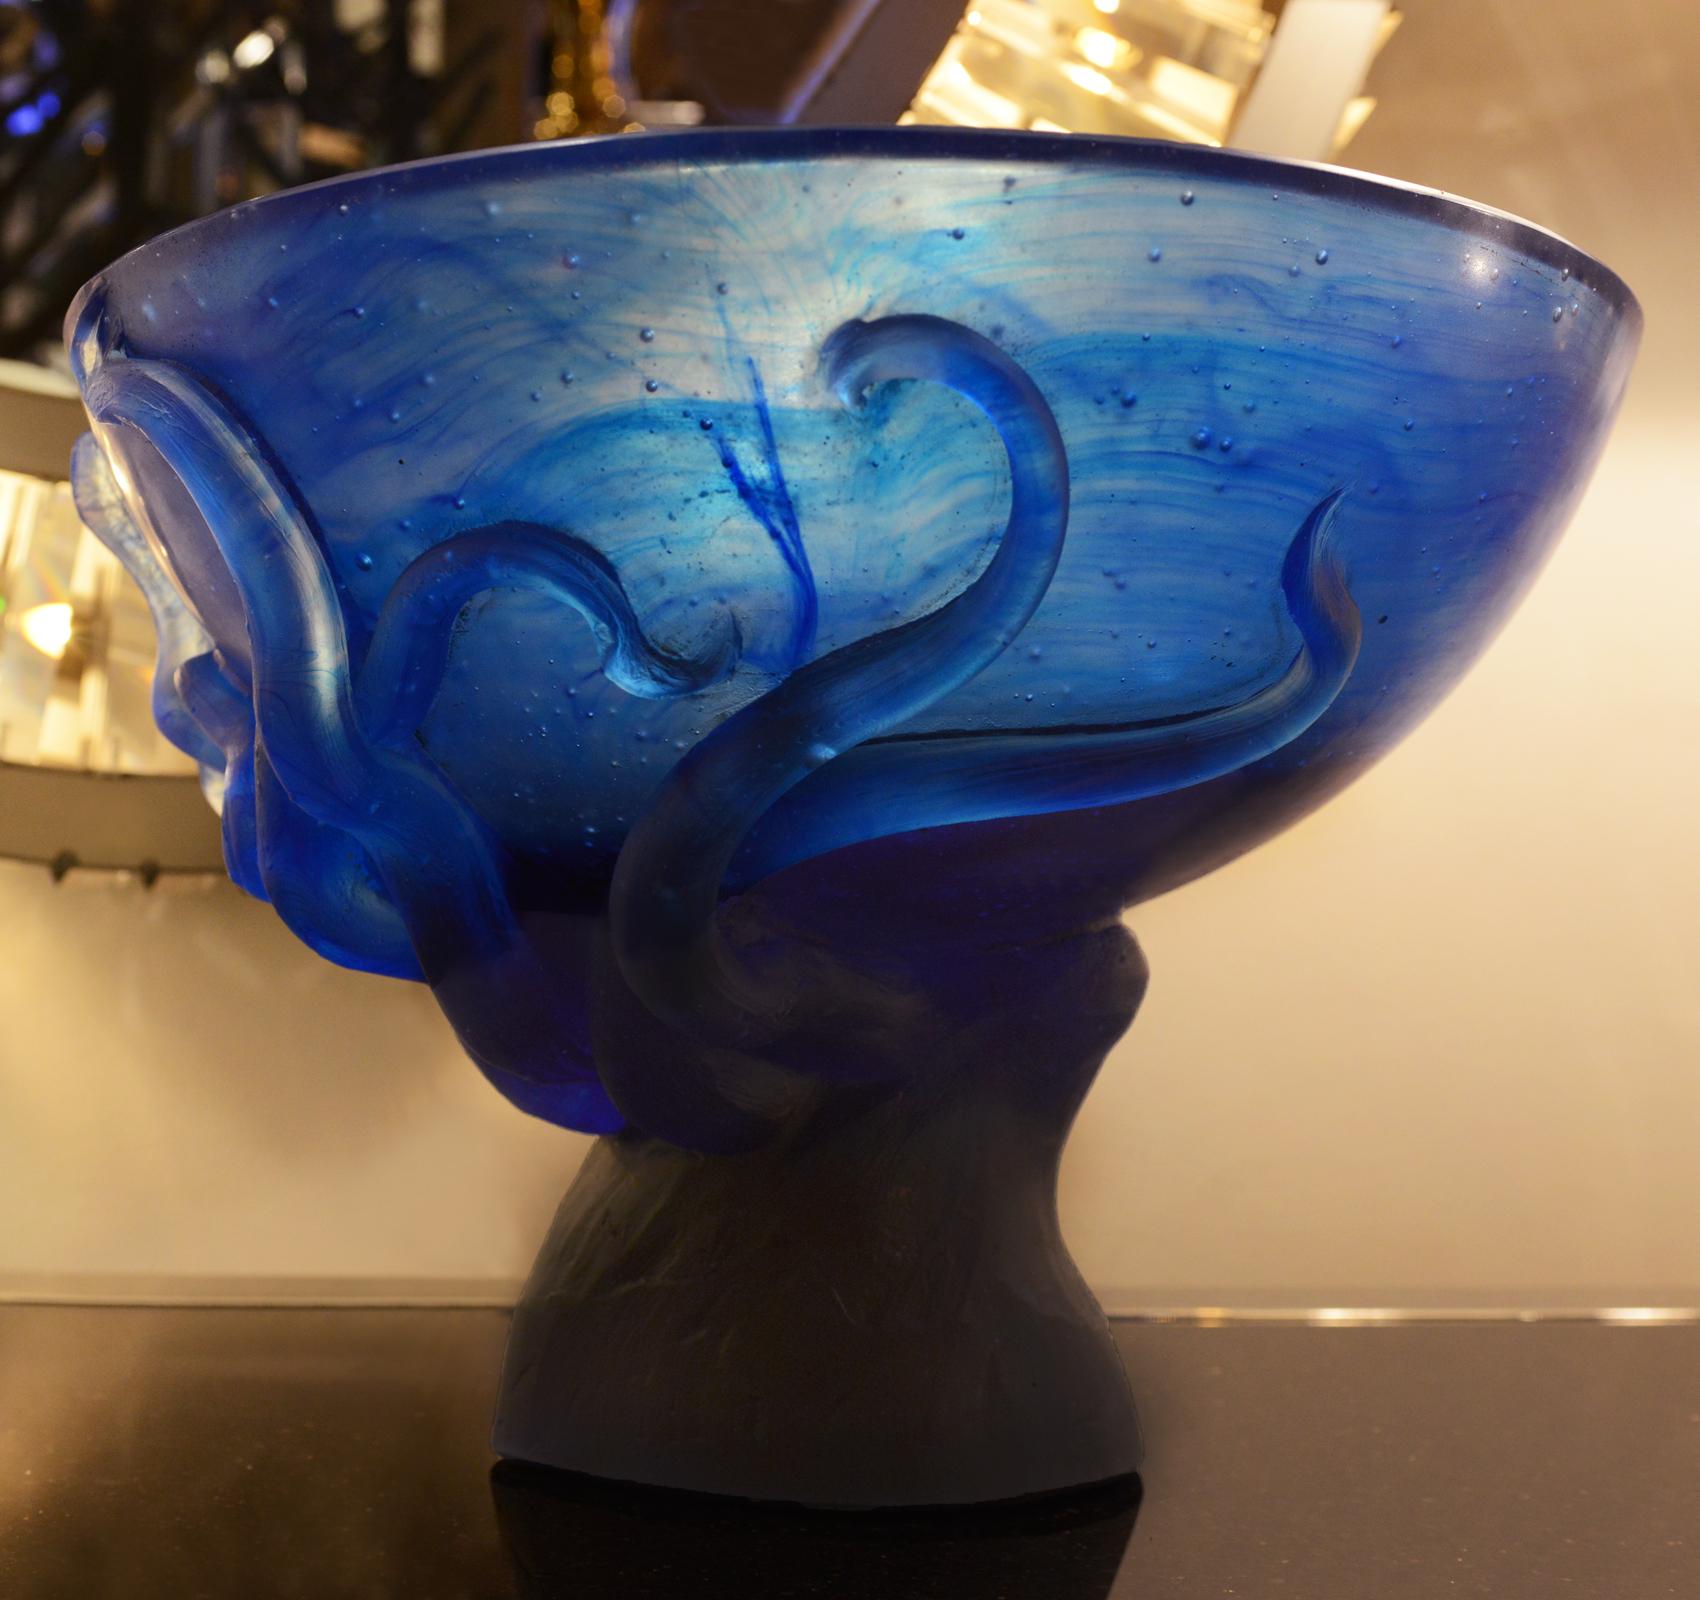 Vase octopus in blue pure glass paste, all handcrafted,
it takes 36 hours to be dry and strong, all in pure glass 
paste, hand carved. Exceptional and unique
piece, made in France in 2019.